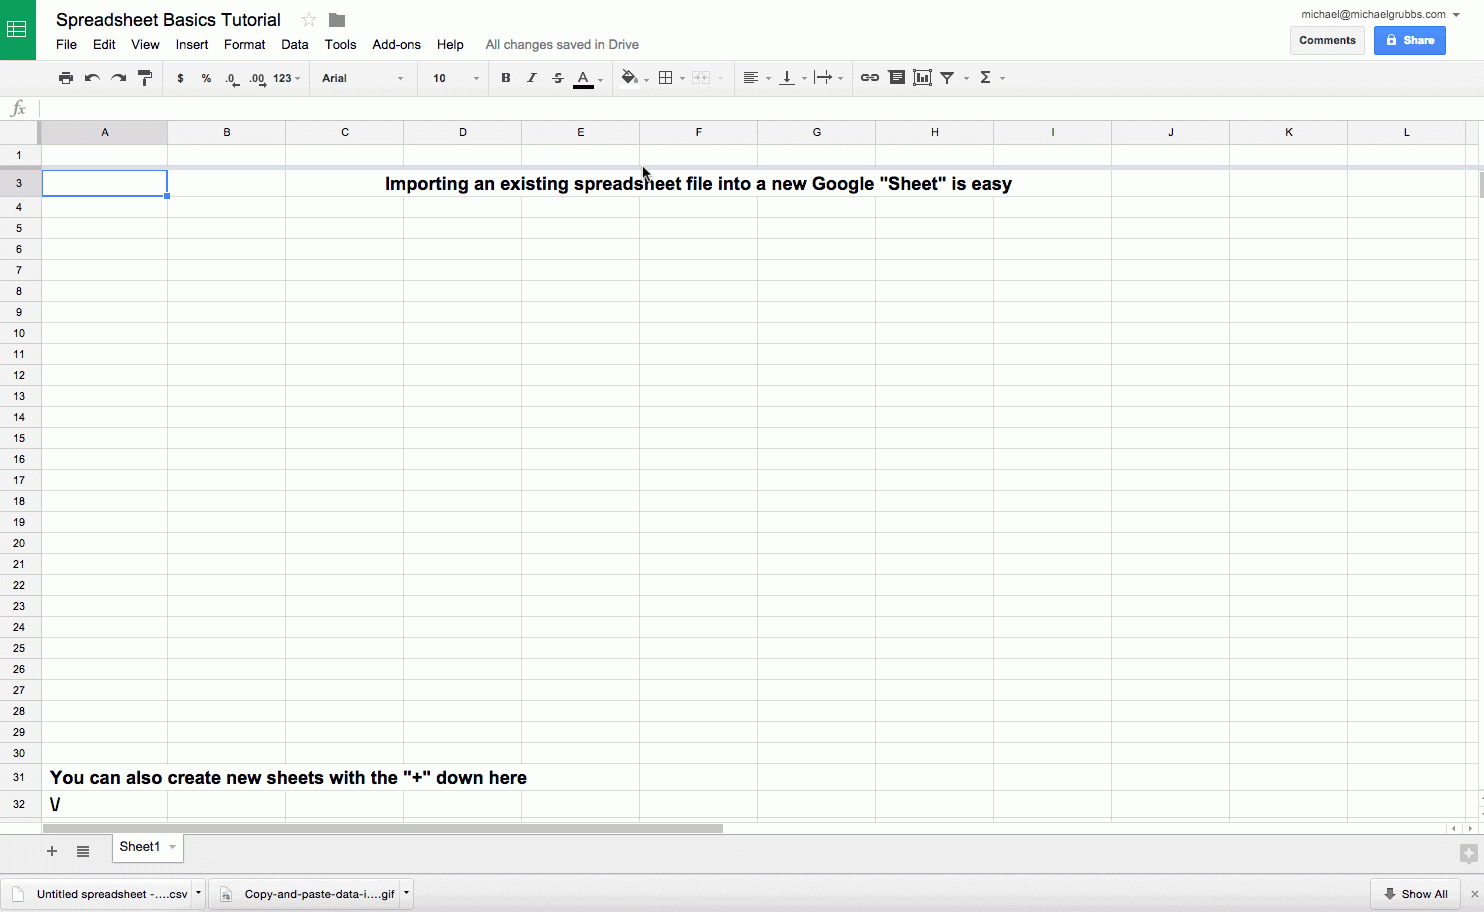 How To Make A Spreadsheet Using Excel For Google Sheets 101: The Beginner's Guide To Online Spreadsheets  The